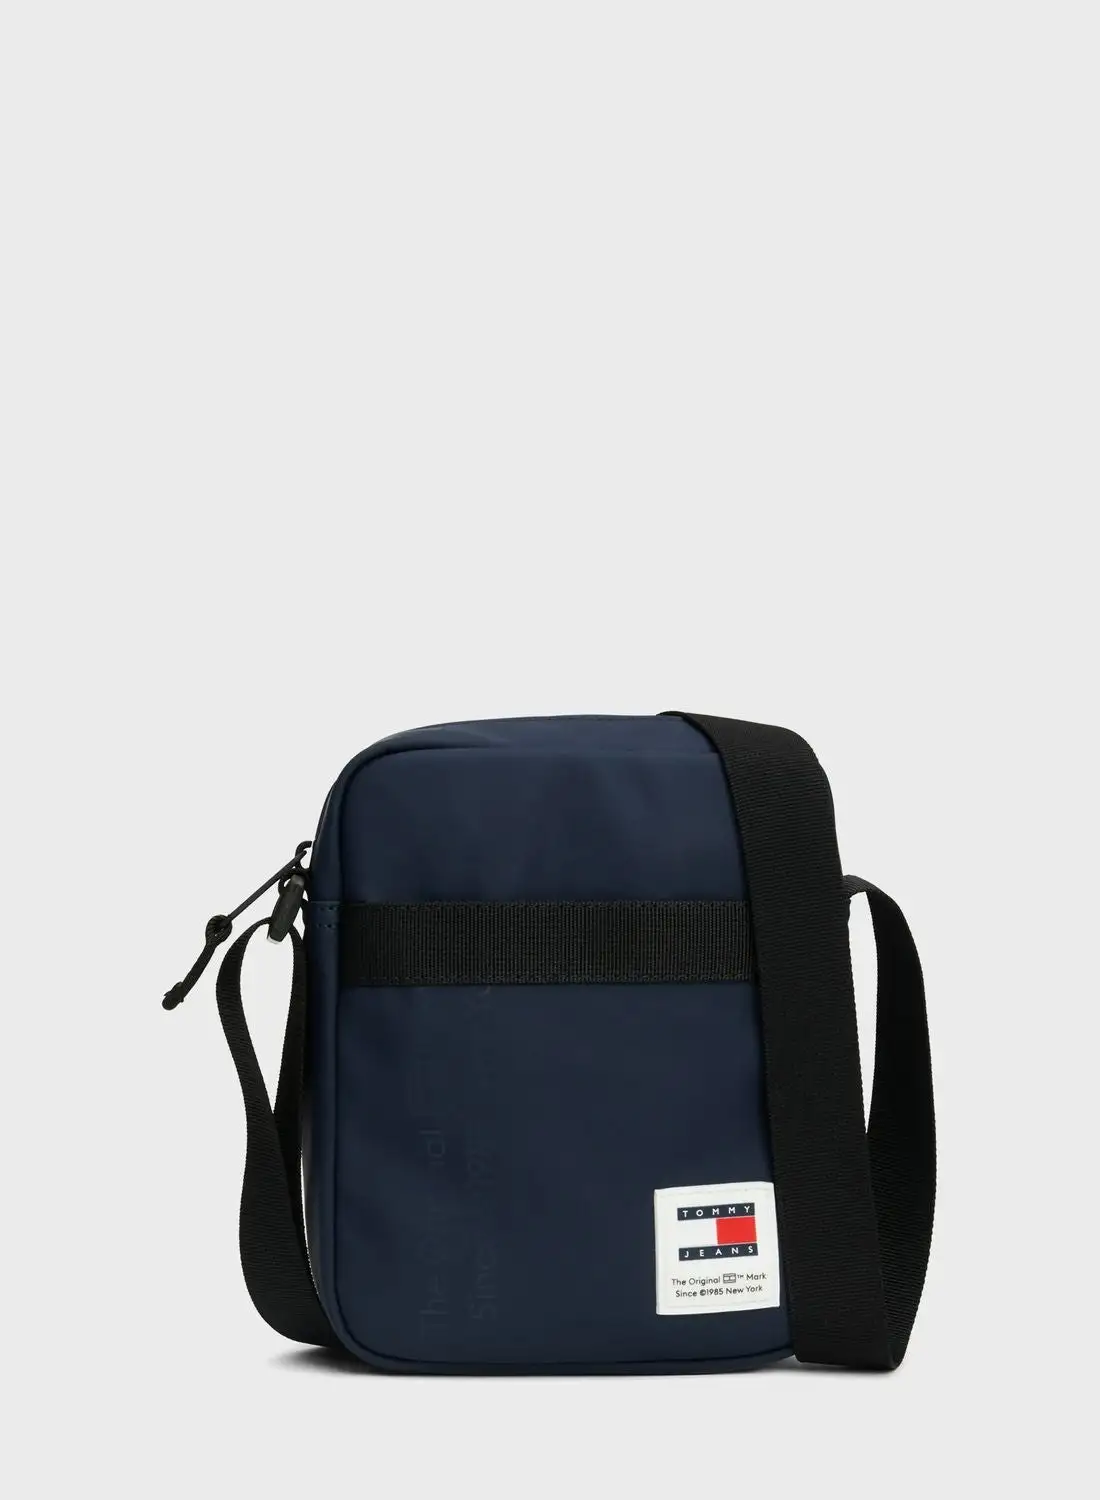 TOMMY JEANS Toiletry Bags